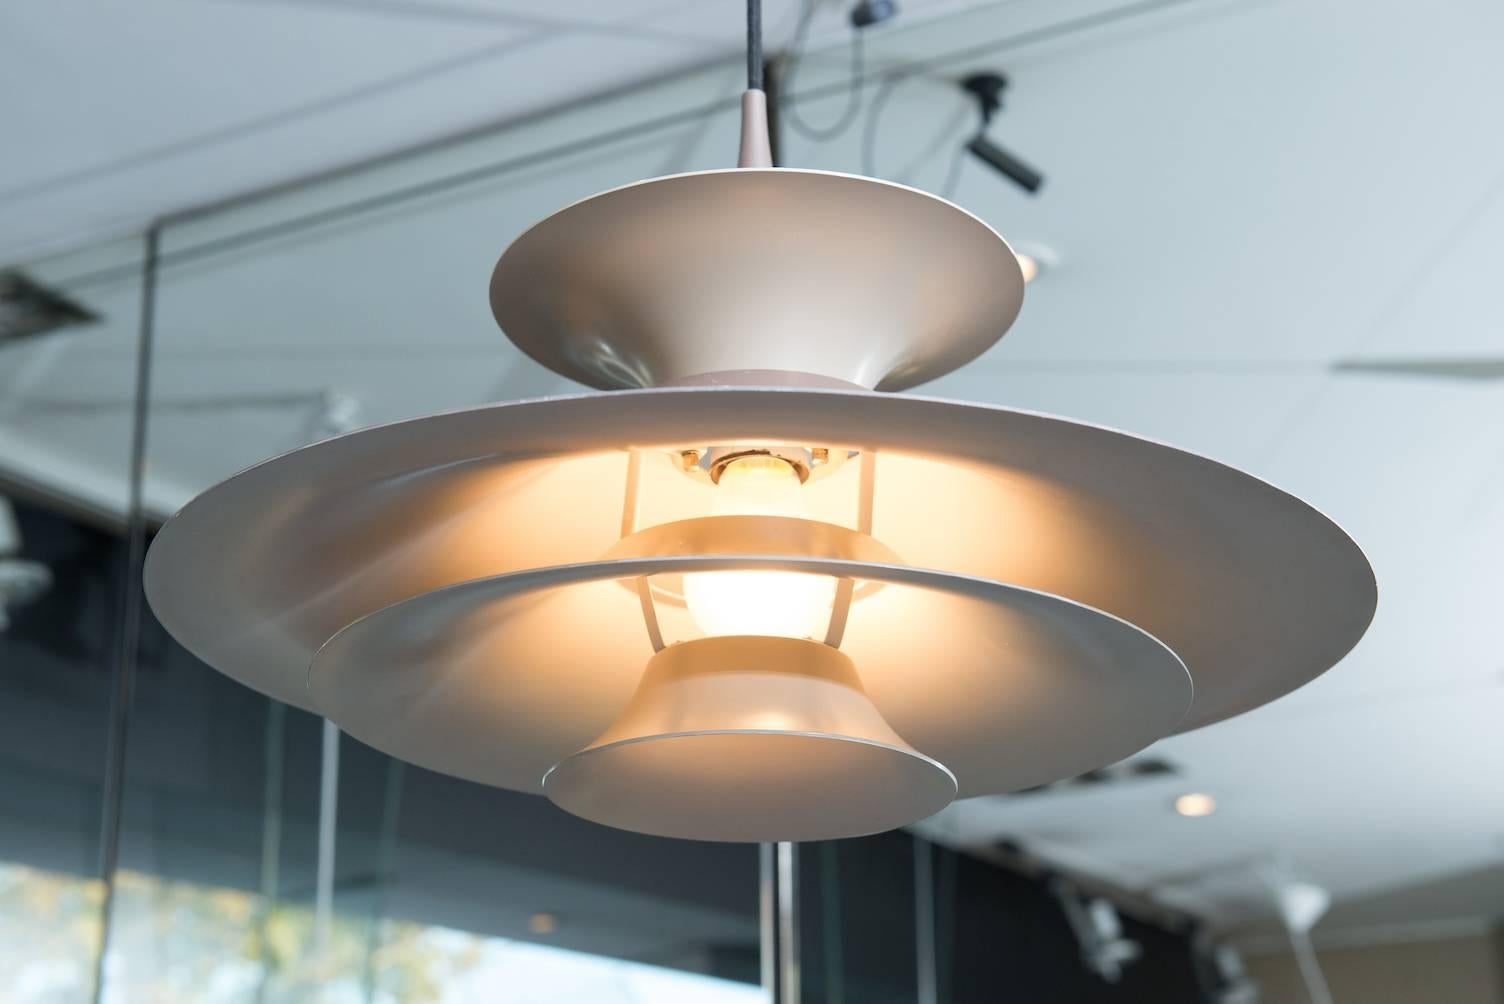 Brown and white lacquered aluminium ceiling lamp.
“Radius” model.
Producer: Fog & Mørup.
One more available in white.